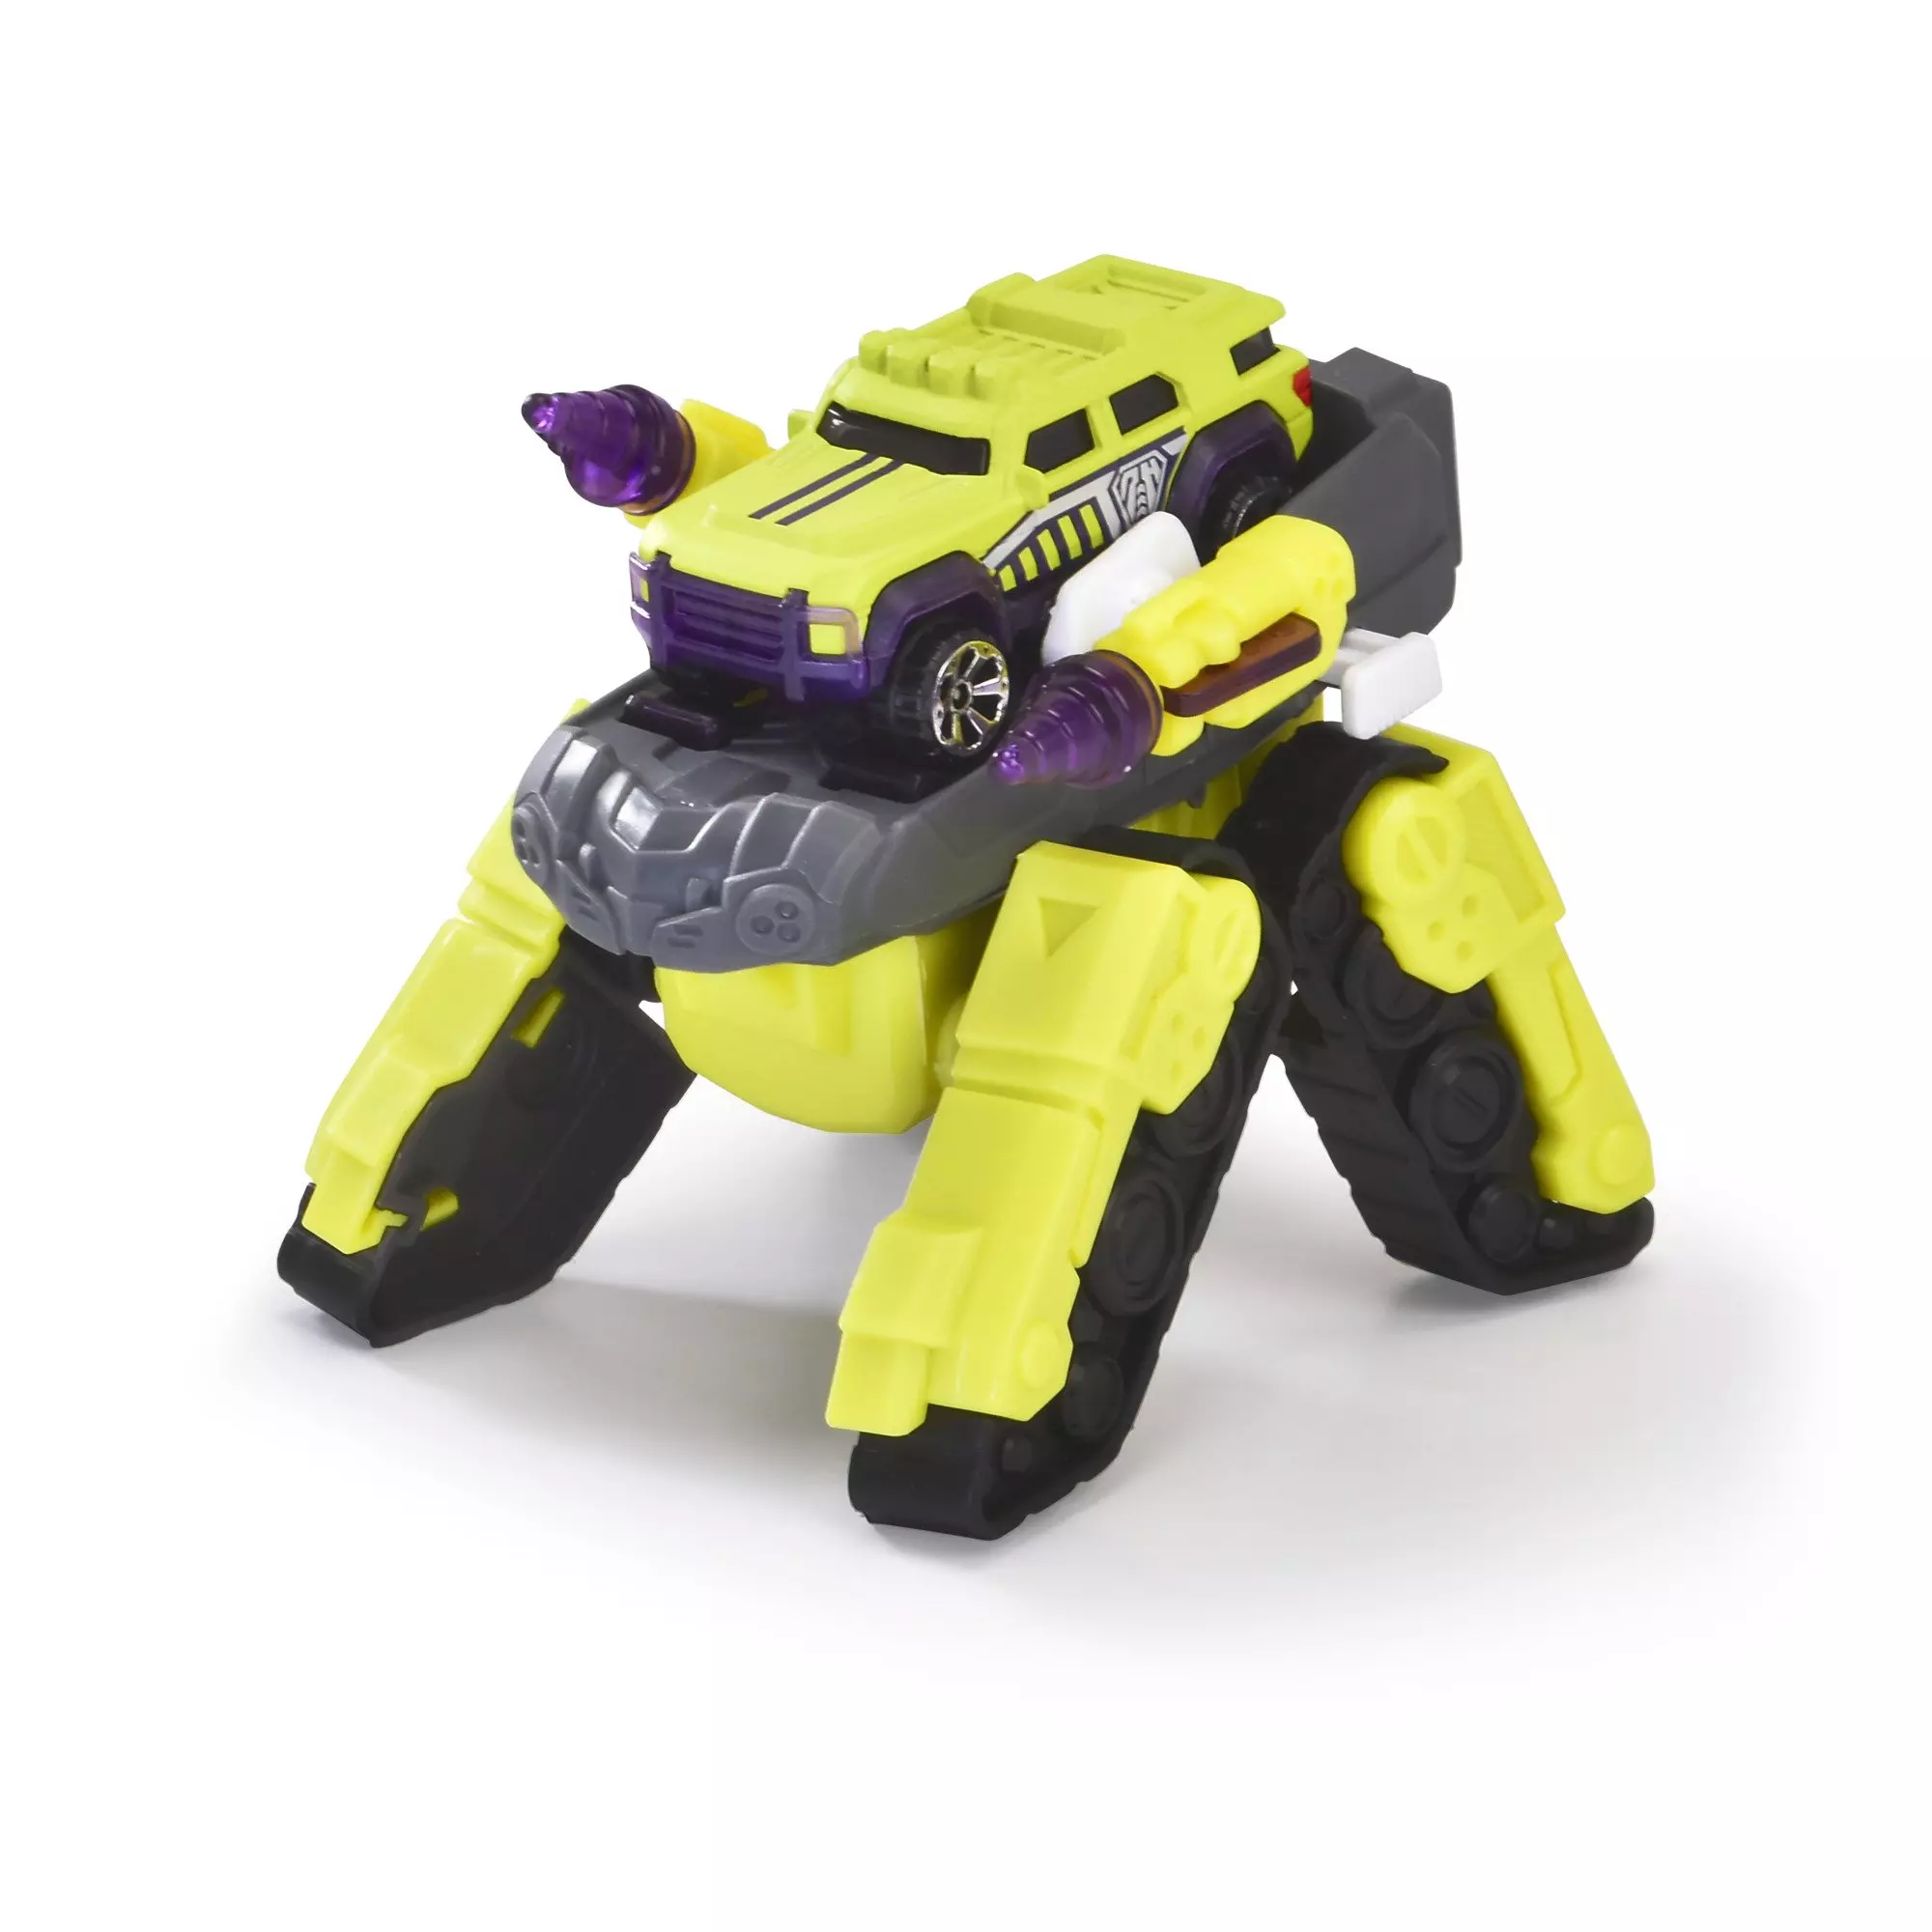 Dickie Toys Rescue Hybrids Robot Spider